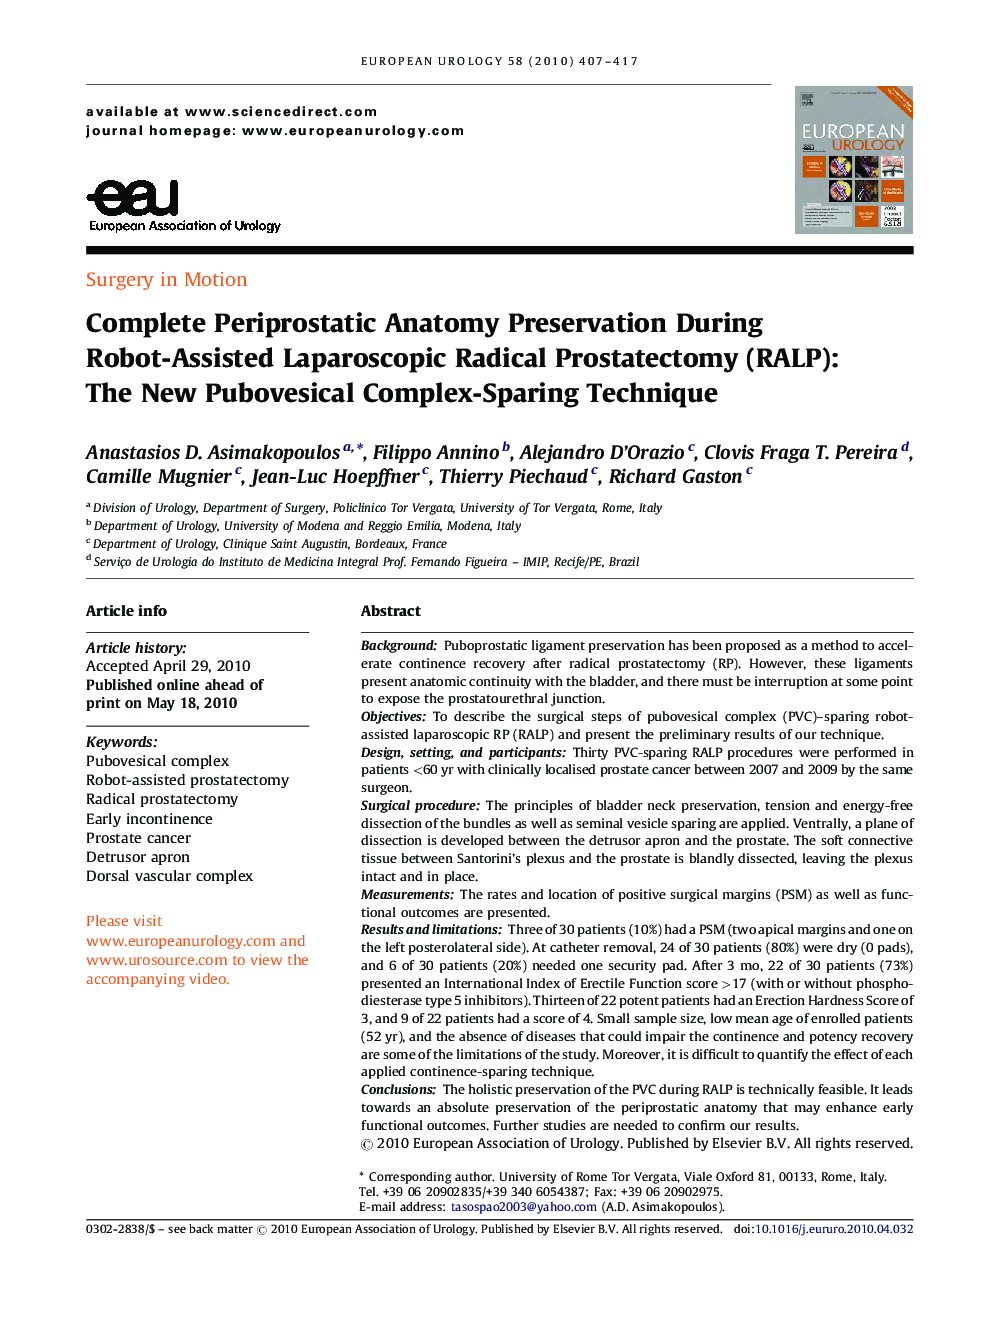 Complete Periprostatic Anatomy Preservation During Robot-Assisted Laparoscopic Radical Prostatectomy (RALP): The New Pubovesical Complex-Sparing Technique